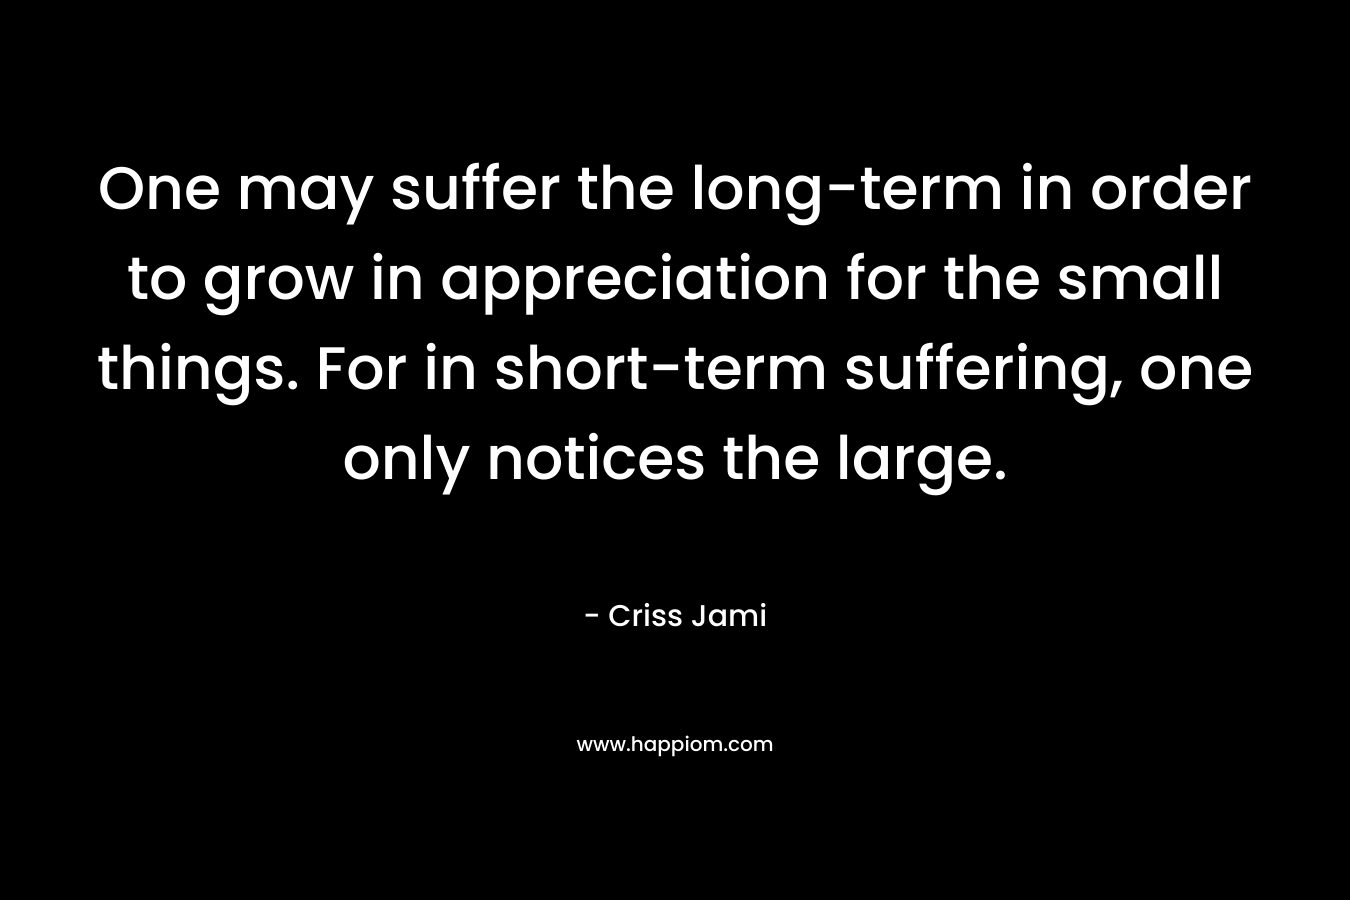 One may suffer the long-term in order to grow in appreciation for the small things. For in short-term suffering, one only notices the large. – Criss Jami